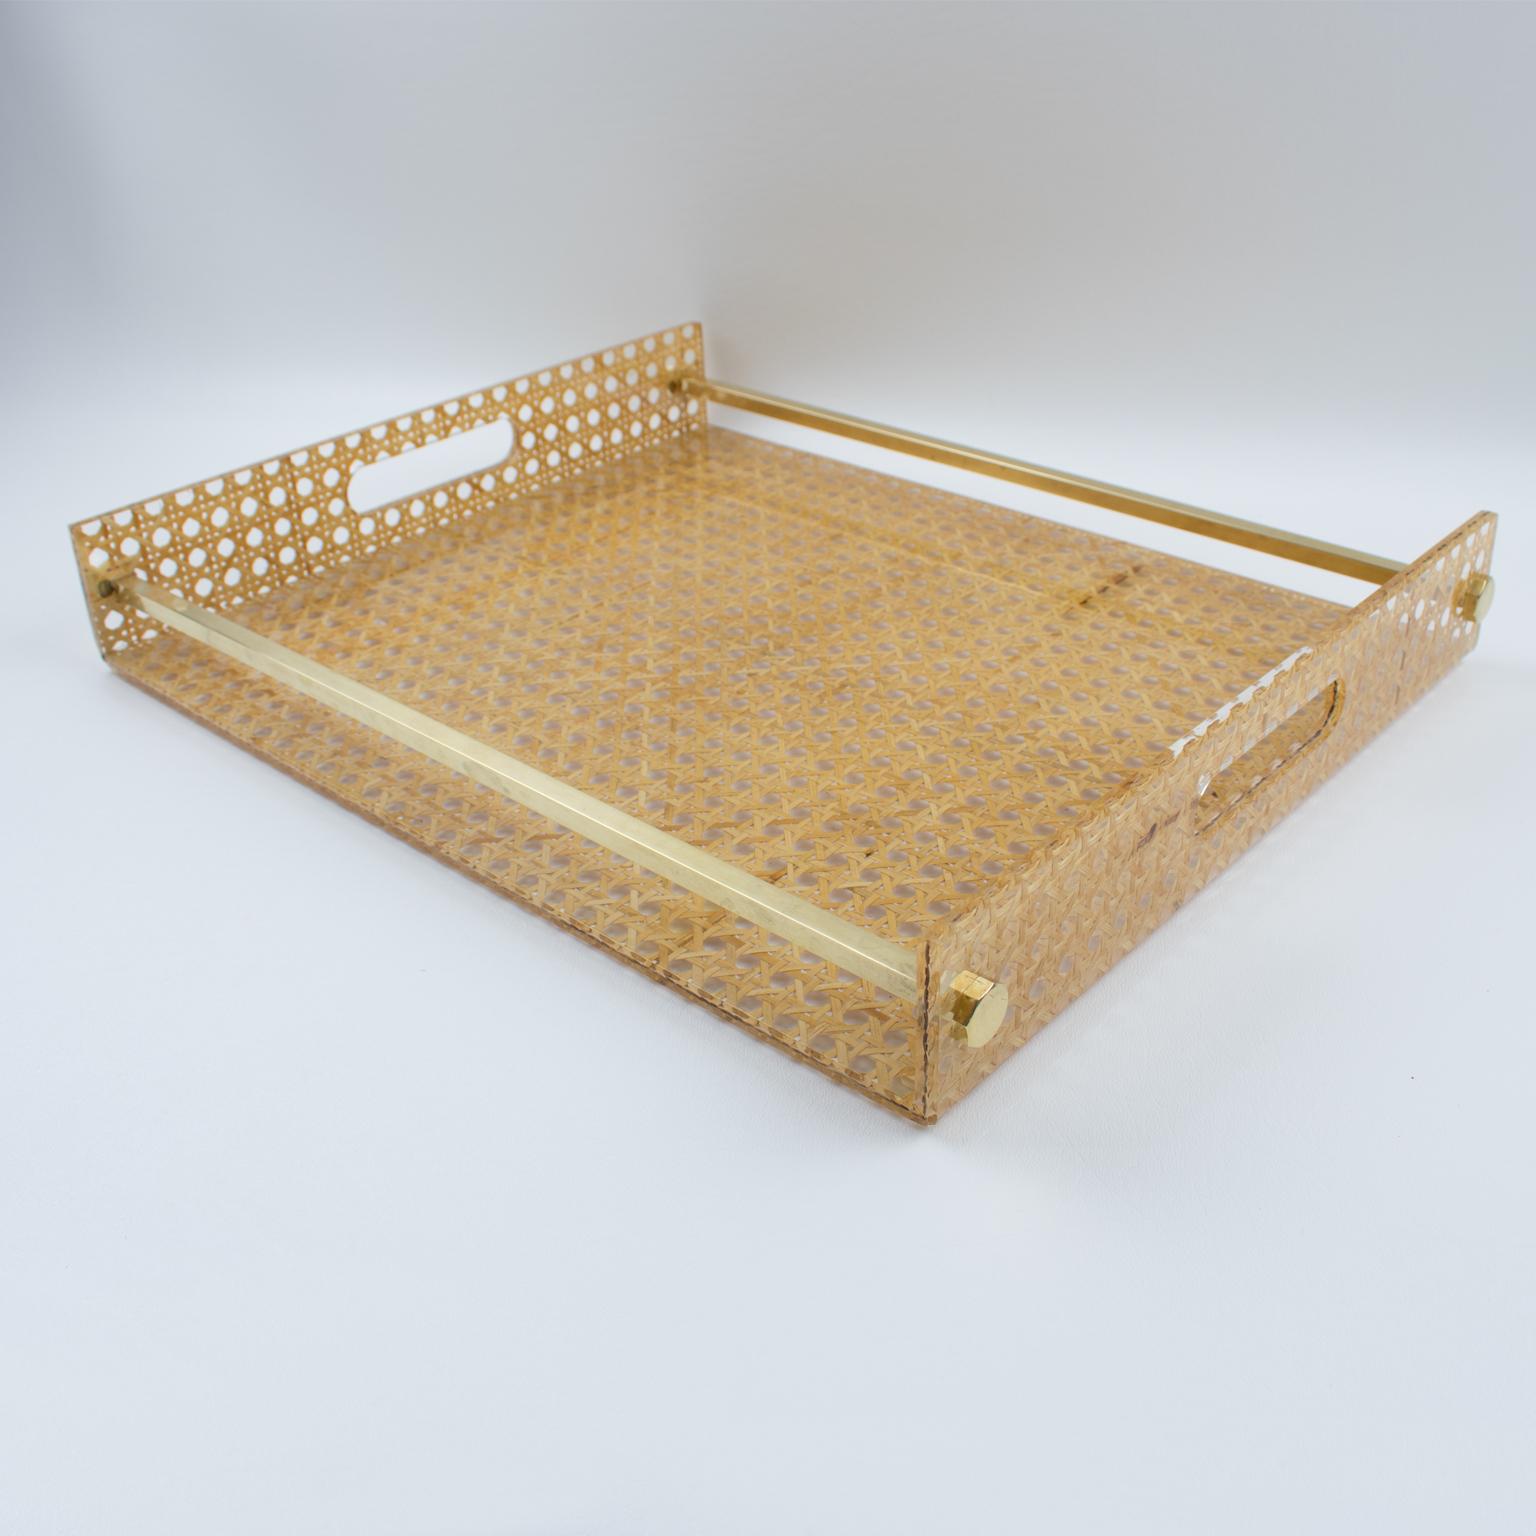 Elegant large barware serving tray designed for Christian Dior home collection, in the 1970s. Rectangular butler shape with gilt brass gallery and real rattan cane-work or wicker embedded in the crystal clear Lucite. Perfect for any modern interior